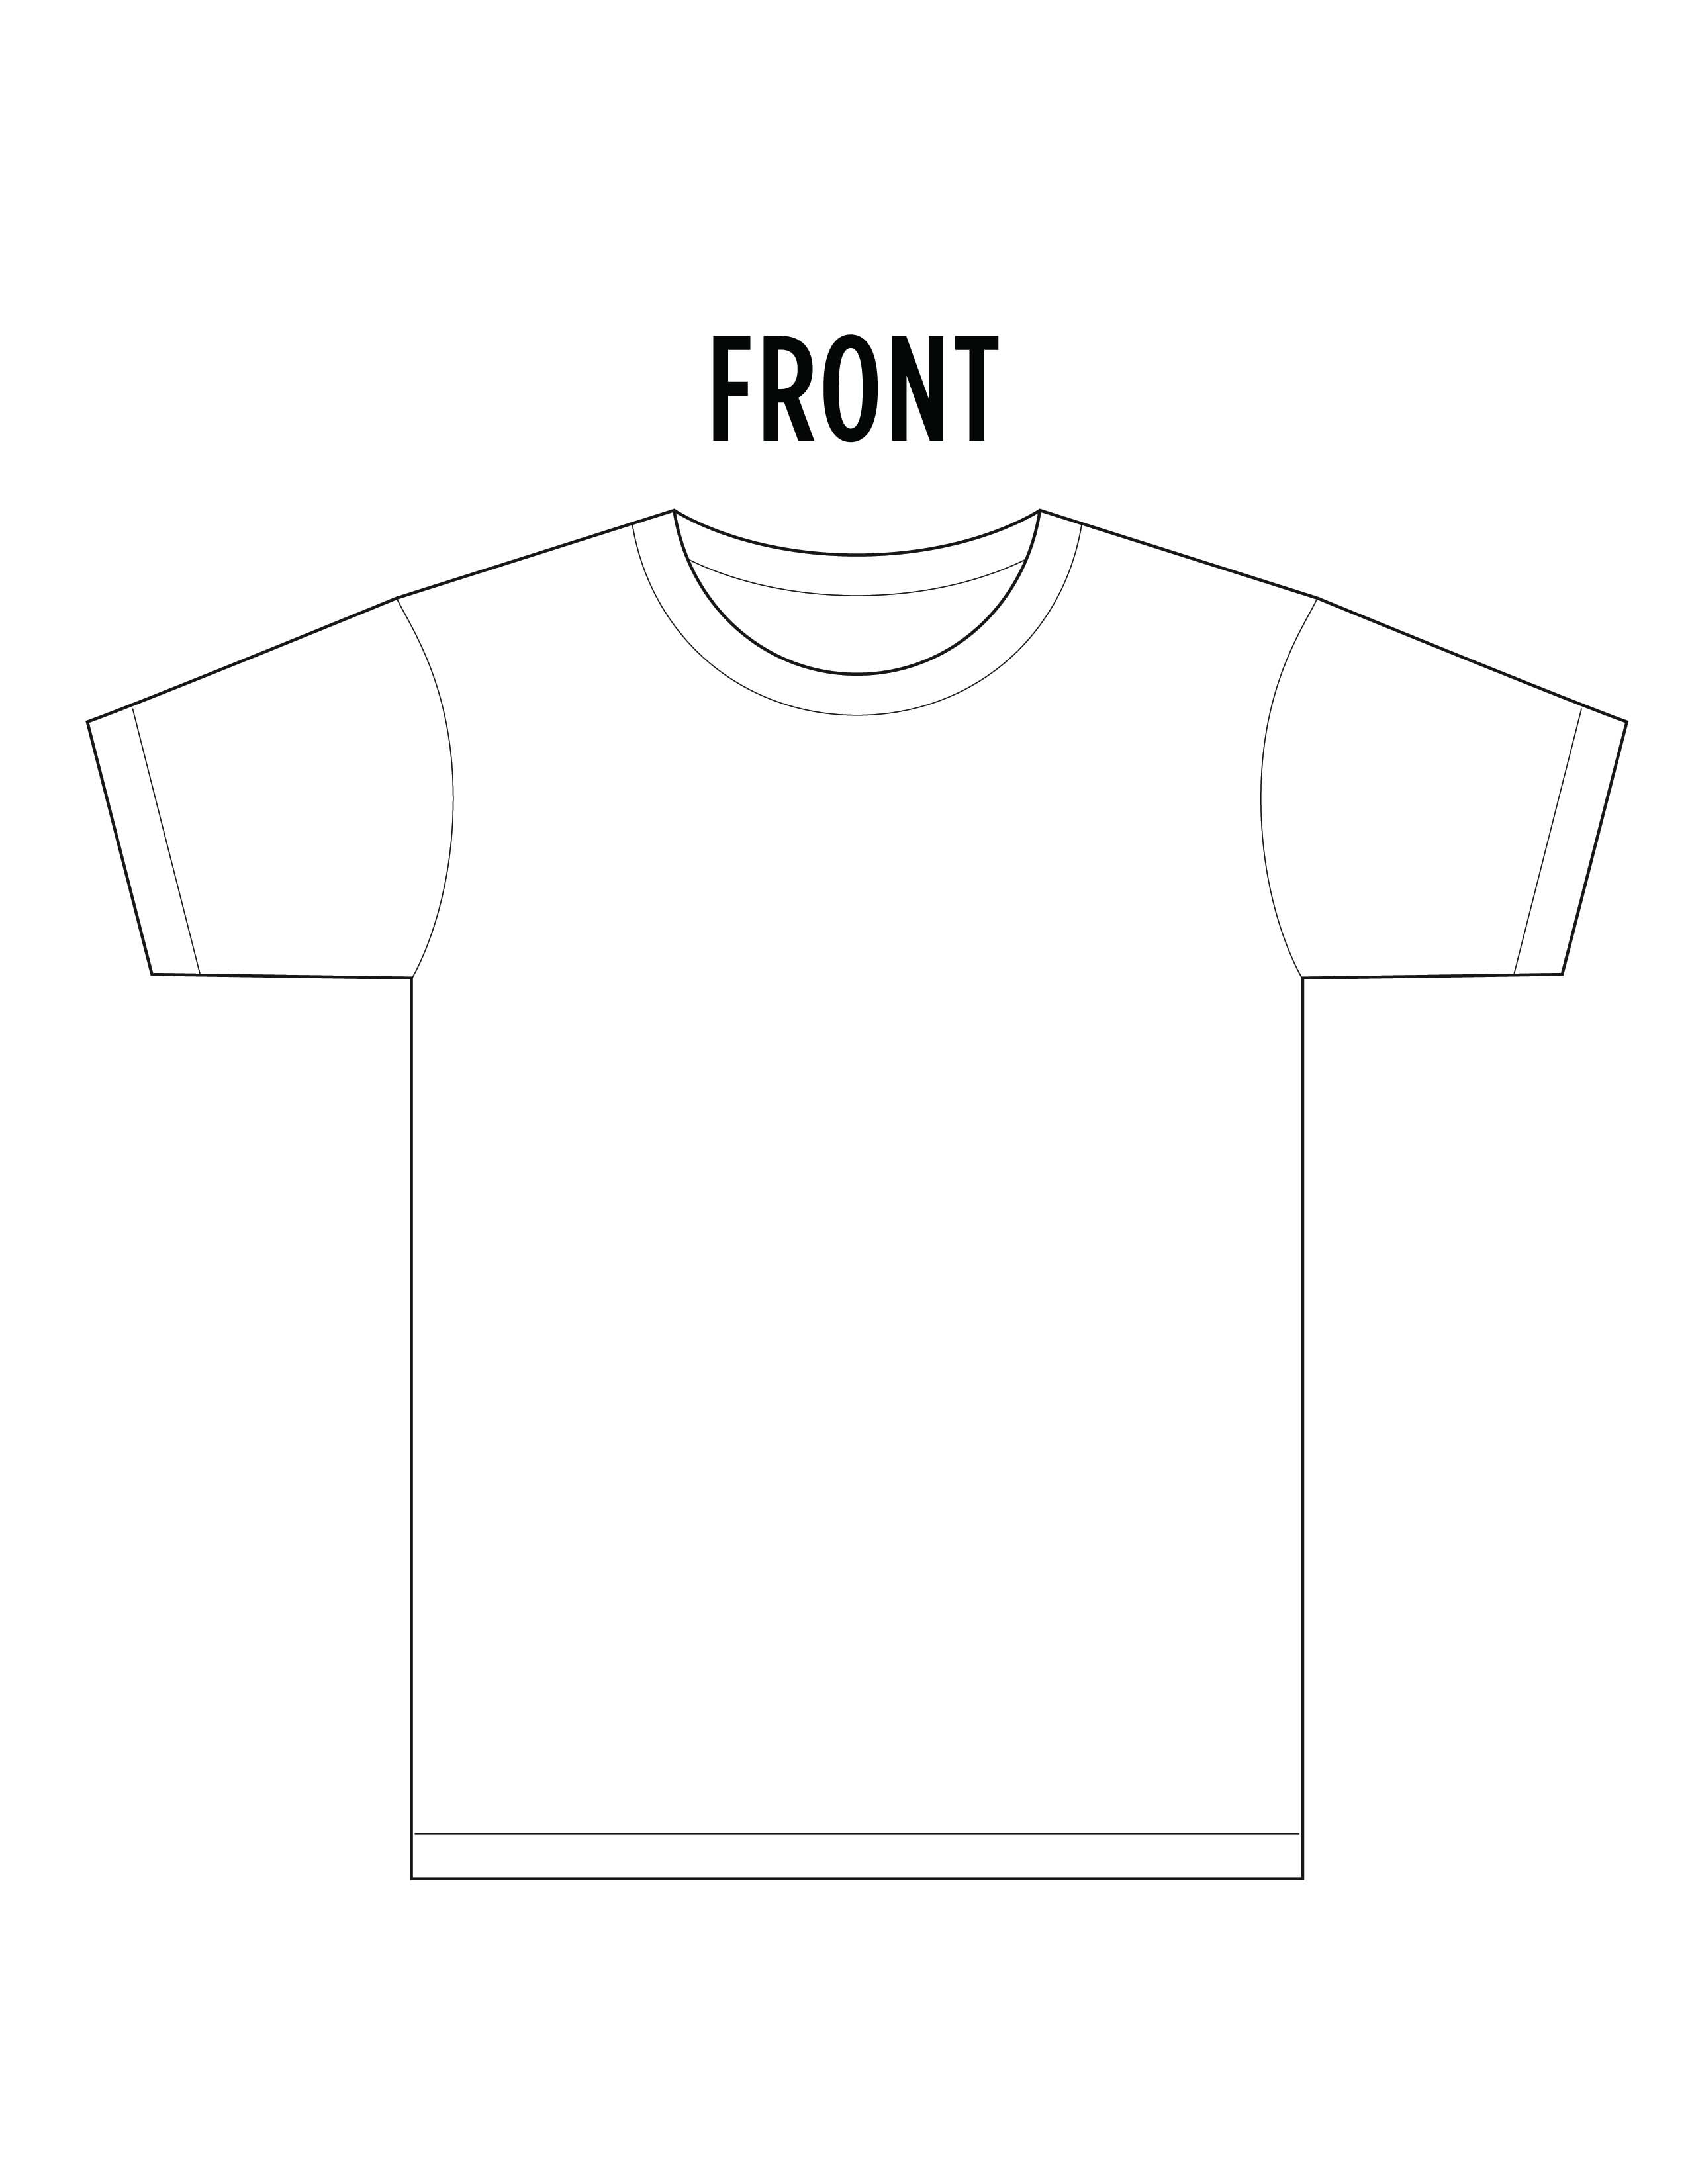 7 TShirt Design Template Images TShirt Outline Template, White T